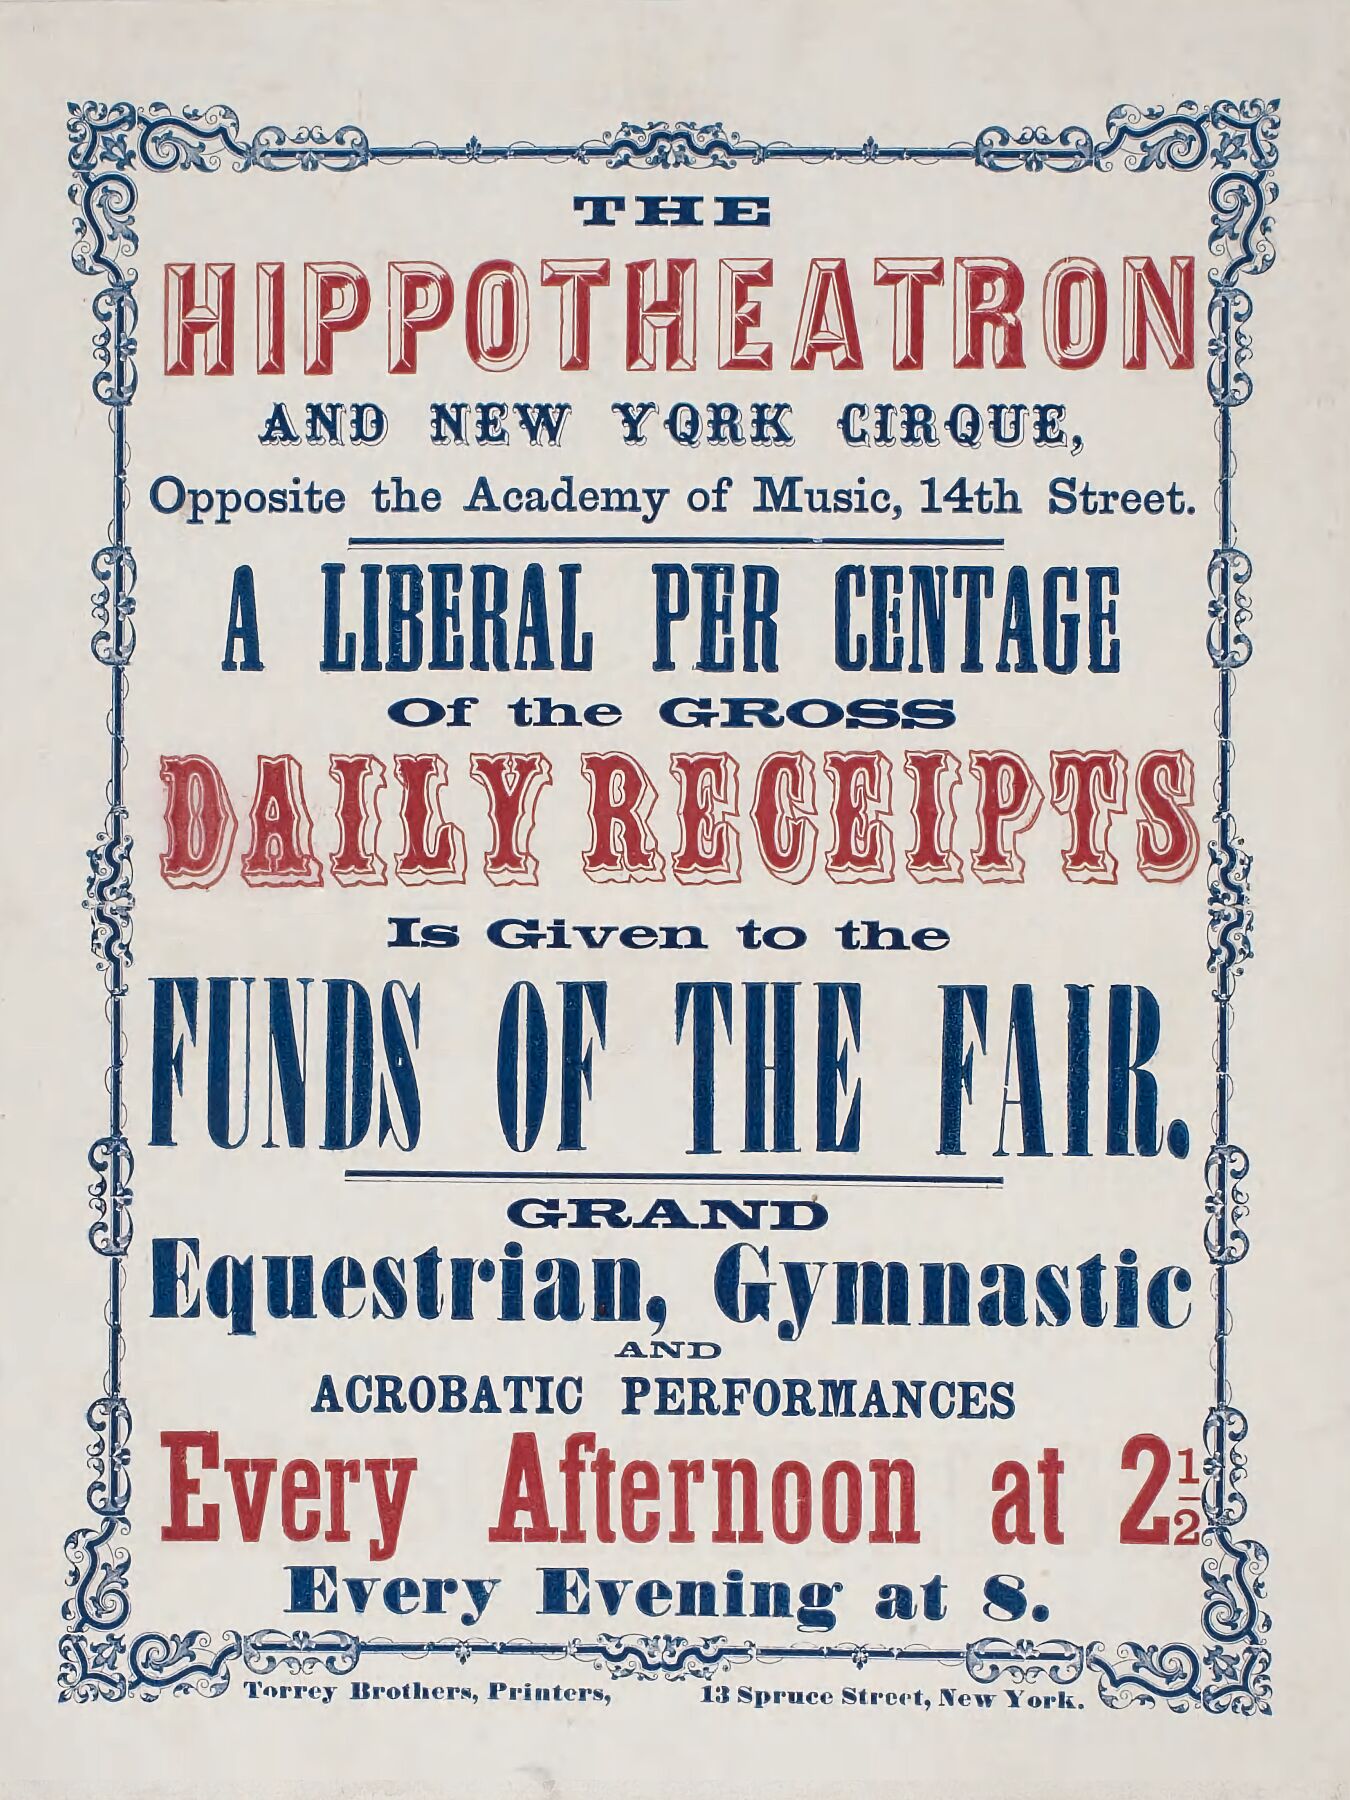 Poster for the Hippotheatron printed by Torrey Brothers, New York (1869)